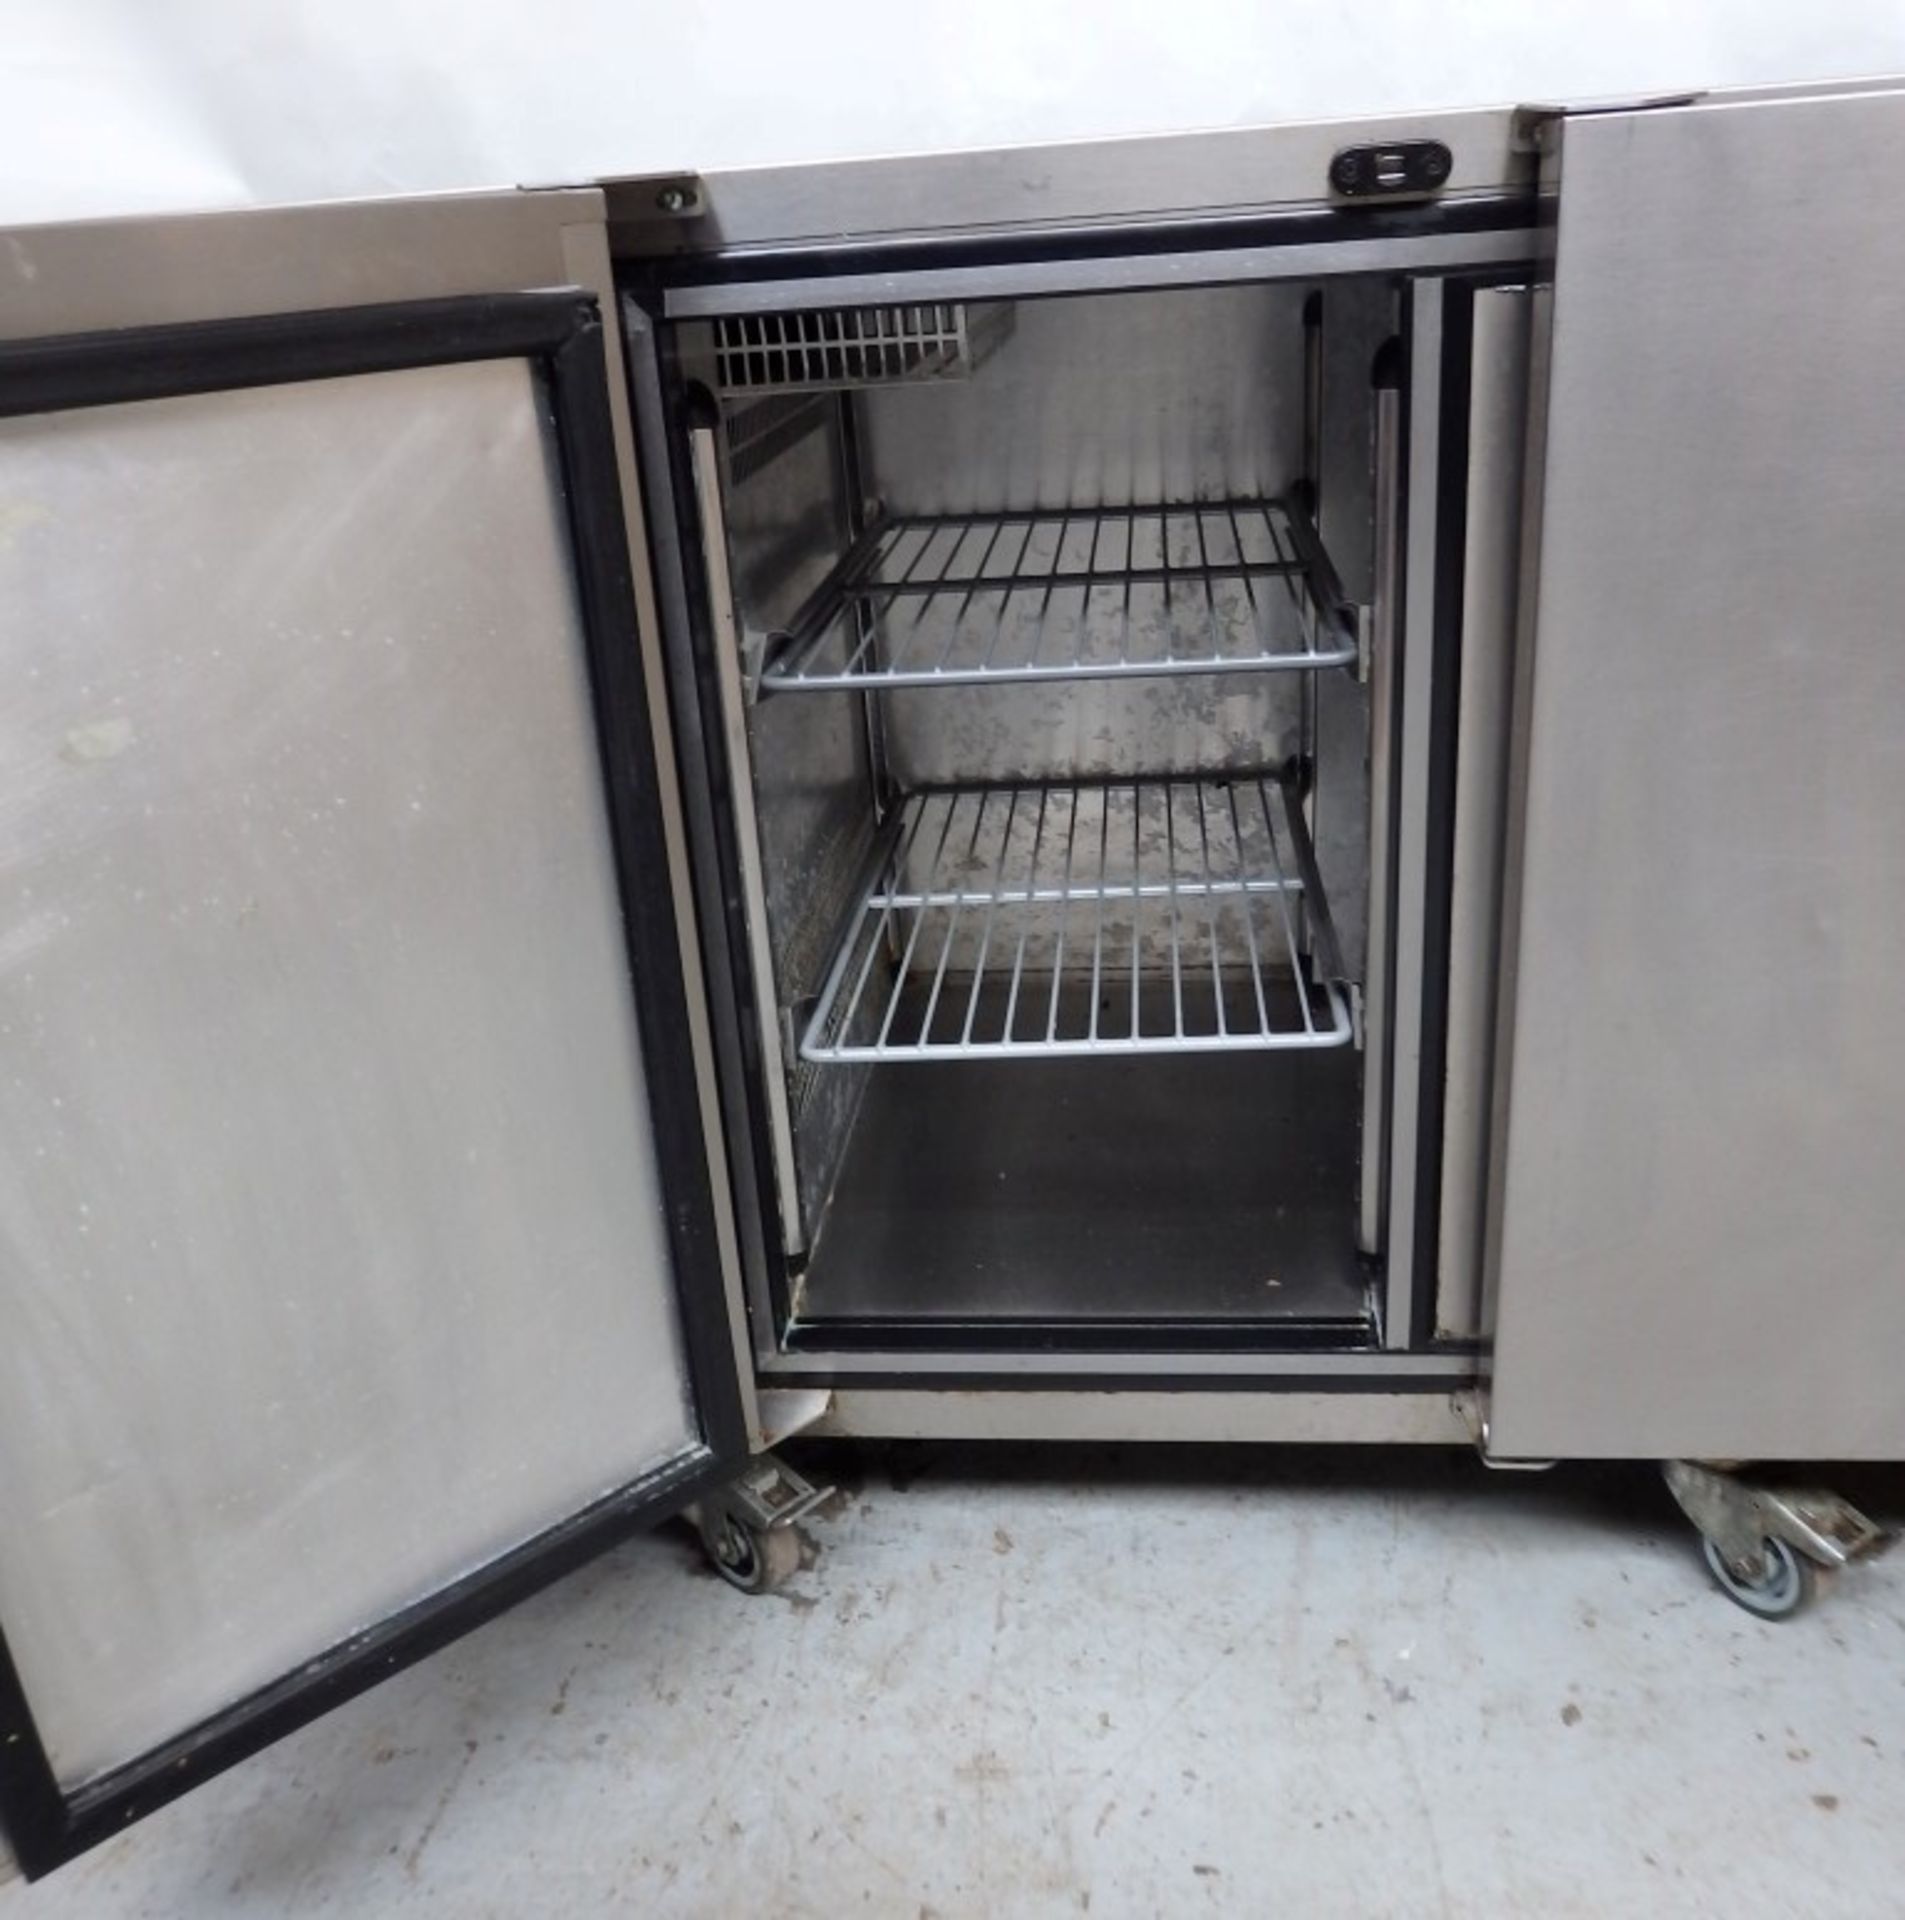 1 x FOSTER Commercial Undercounter Refrigerator With 3-Door Storage, Drawer And Stainless Steel - Image 11 of 13